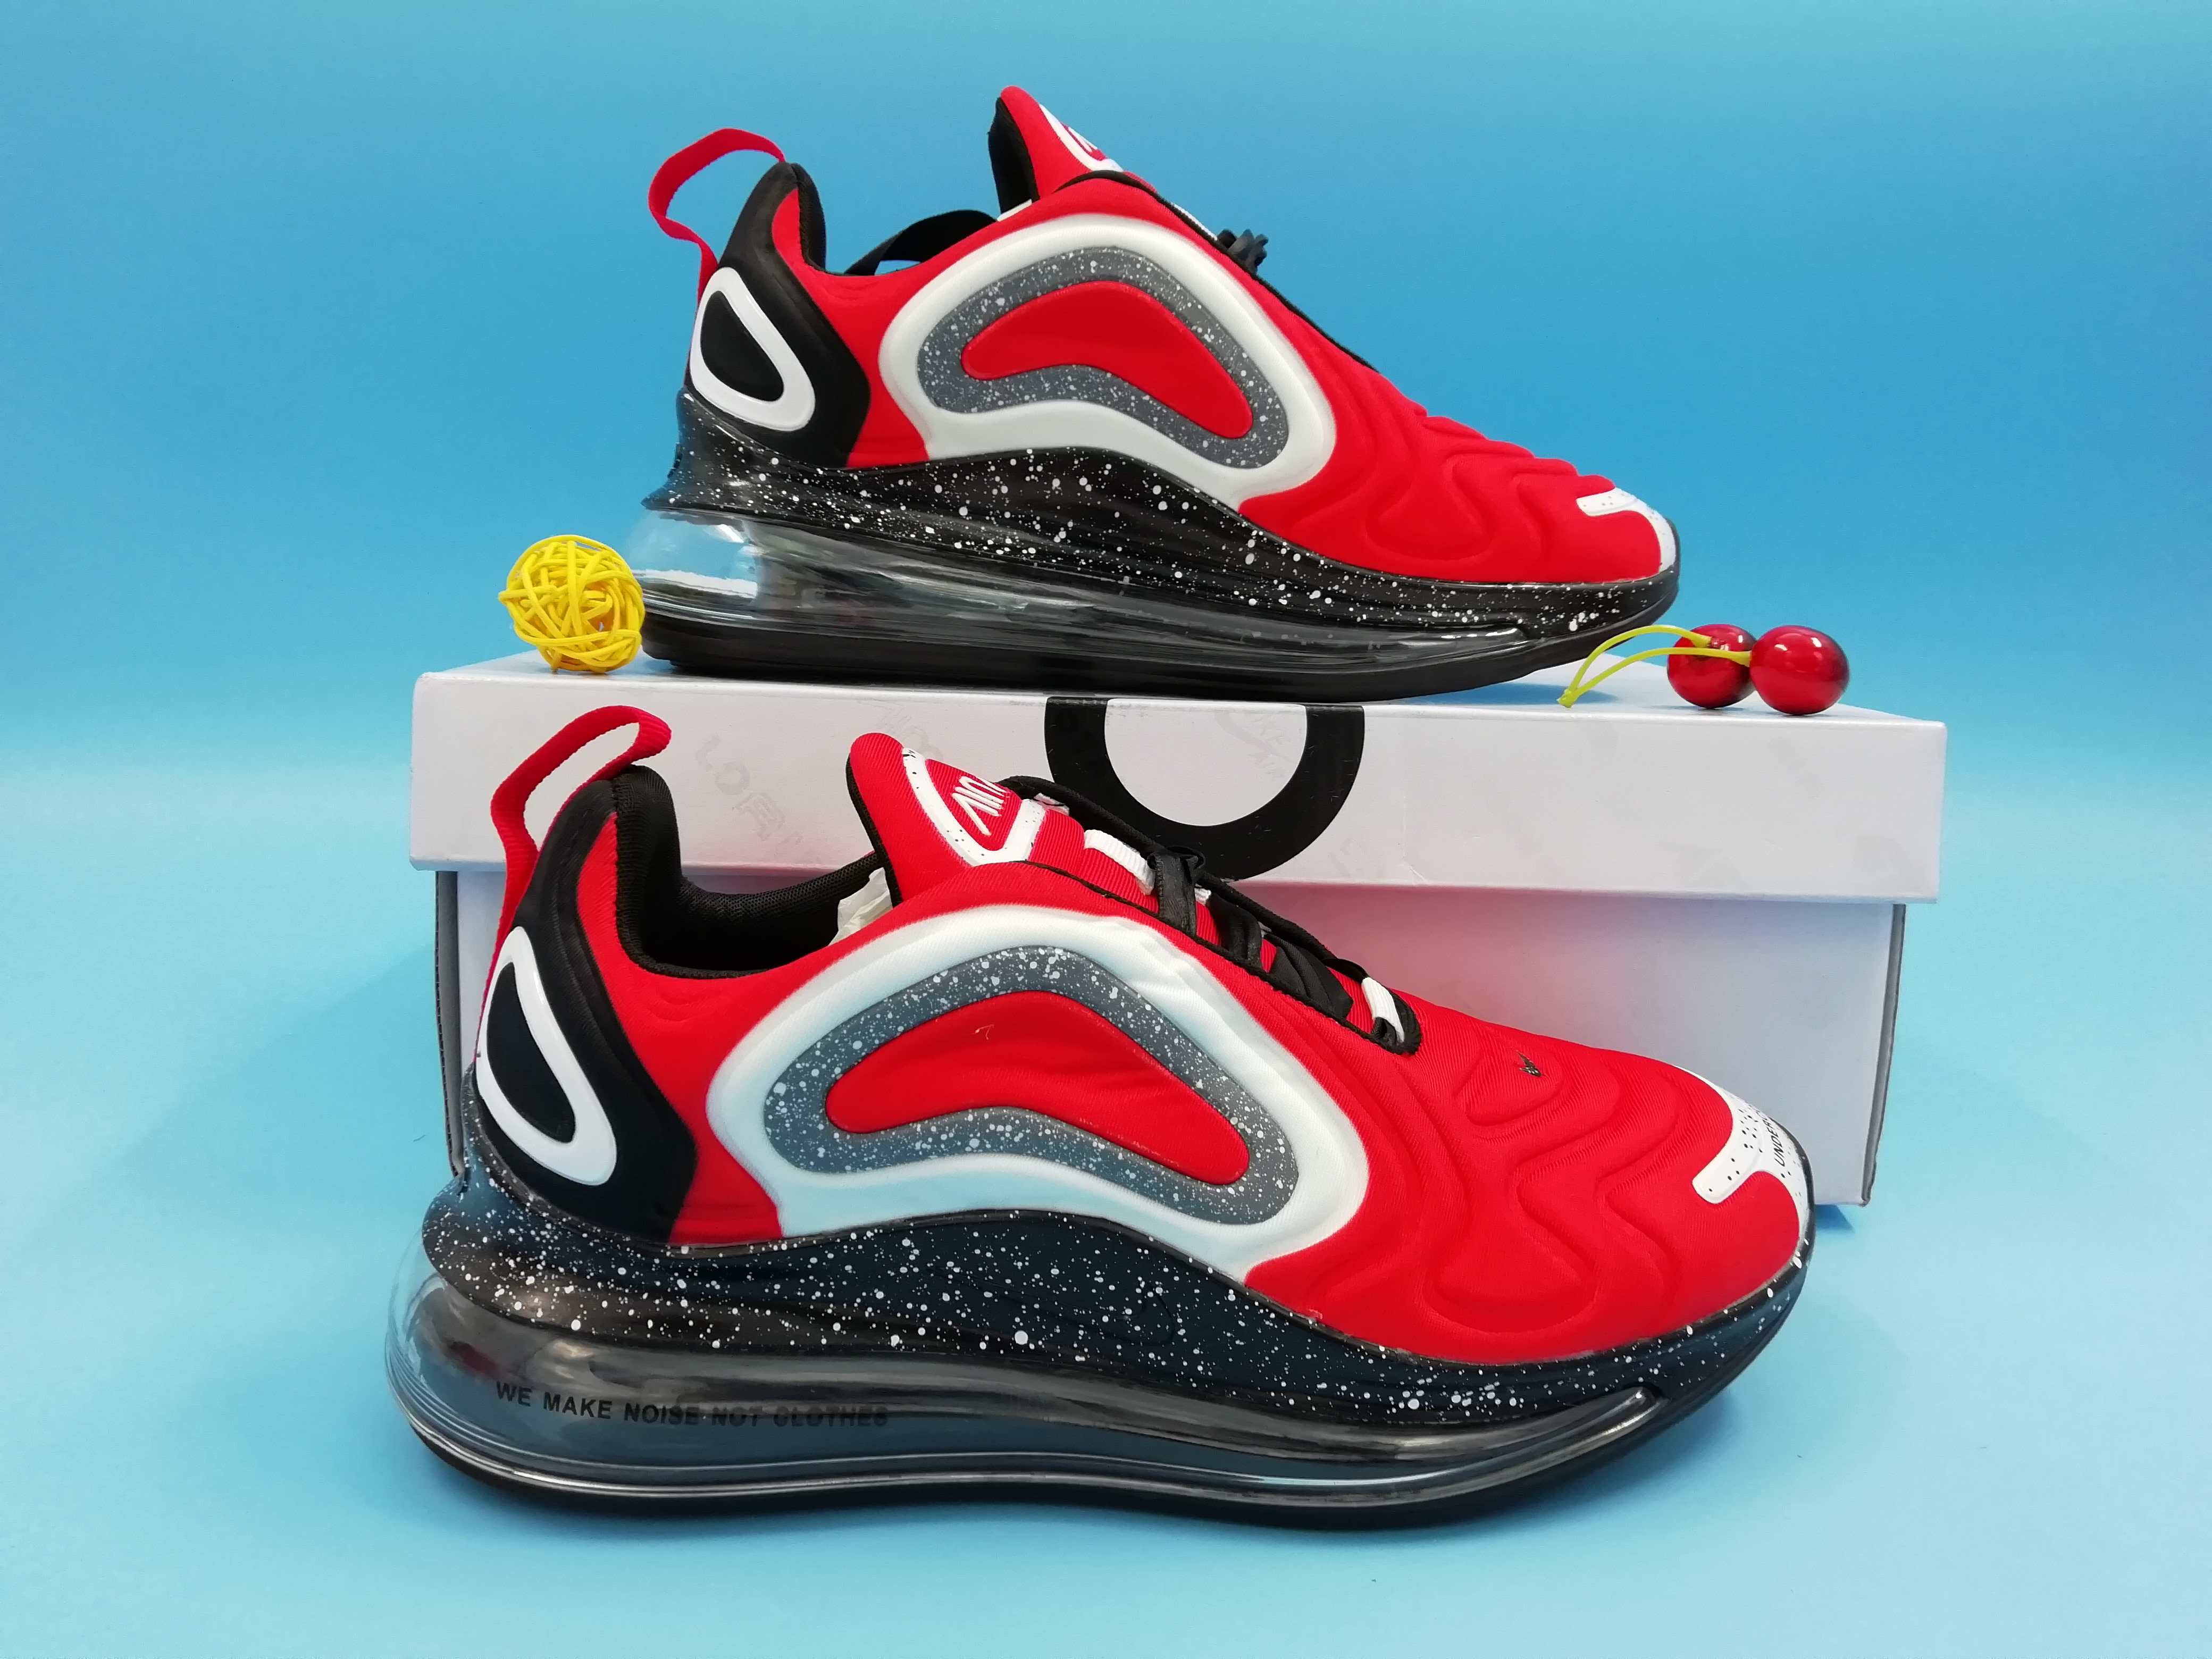 Off-white Nike Air Max 720 Hot Red White Black Shoes